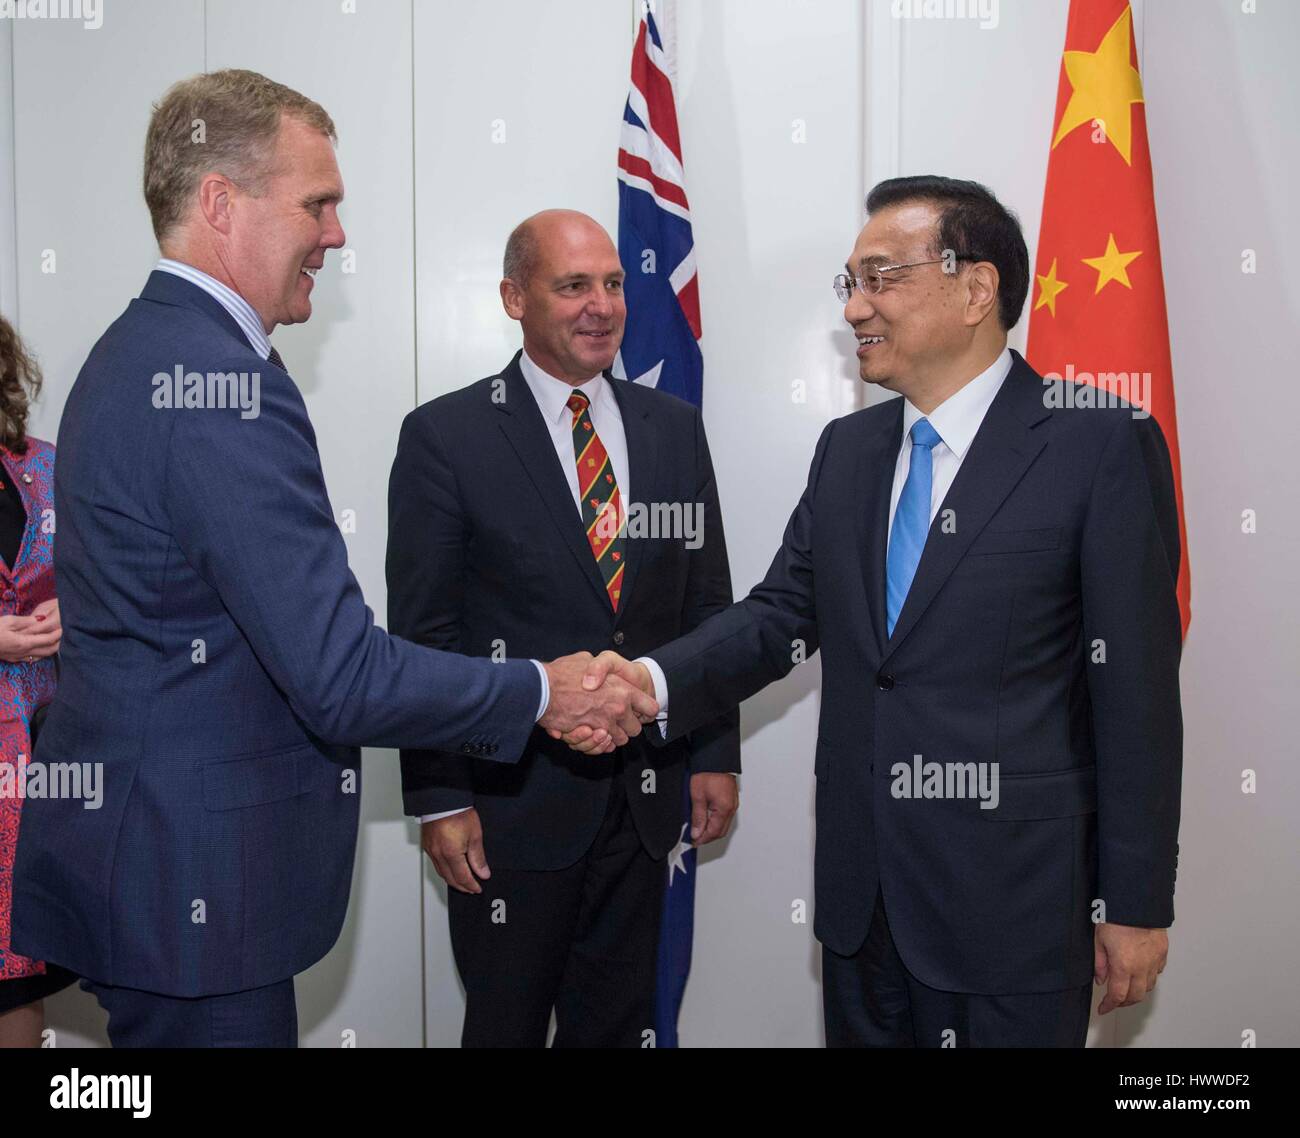 Canberra, Australia. 23rd Mar, 2017. Chinese Premier Li Keqiang(R) meets with Australian Senate President Stephen Parry(C) and Speaker of the House of Representatives Tony Smith in the Parliament House in Canberra, Australia, March 23, 2017. Credit: Li Tao/Xinhua/Alamy Live News Stock Photo